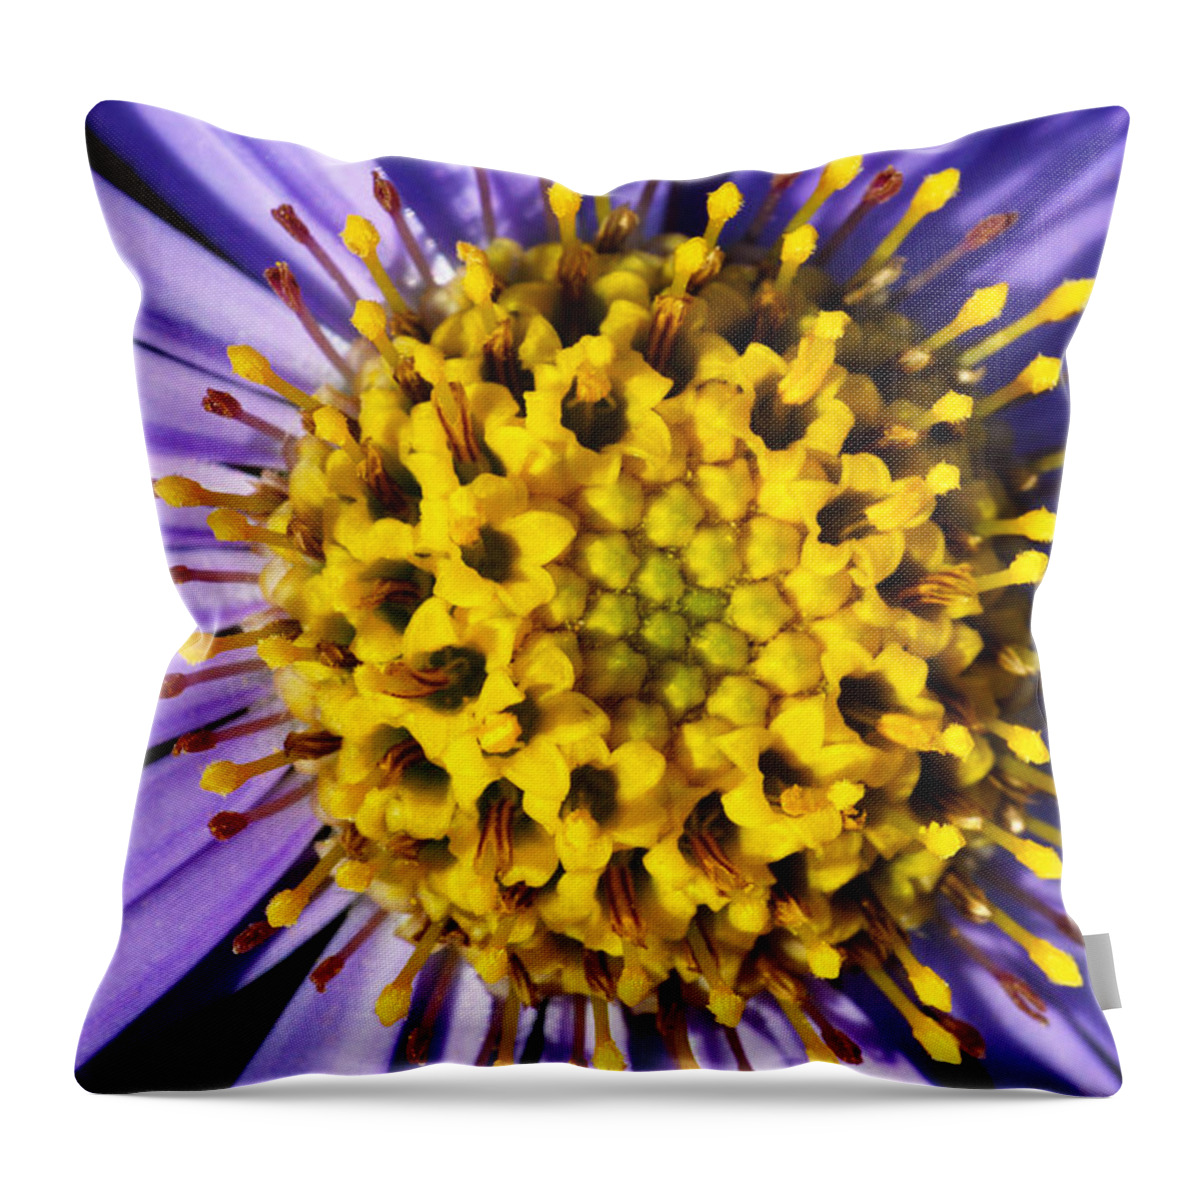 Art Throw Pillow featuring the photograph Sunburst by Wendy Wilton